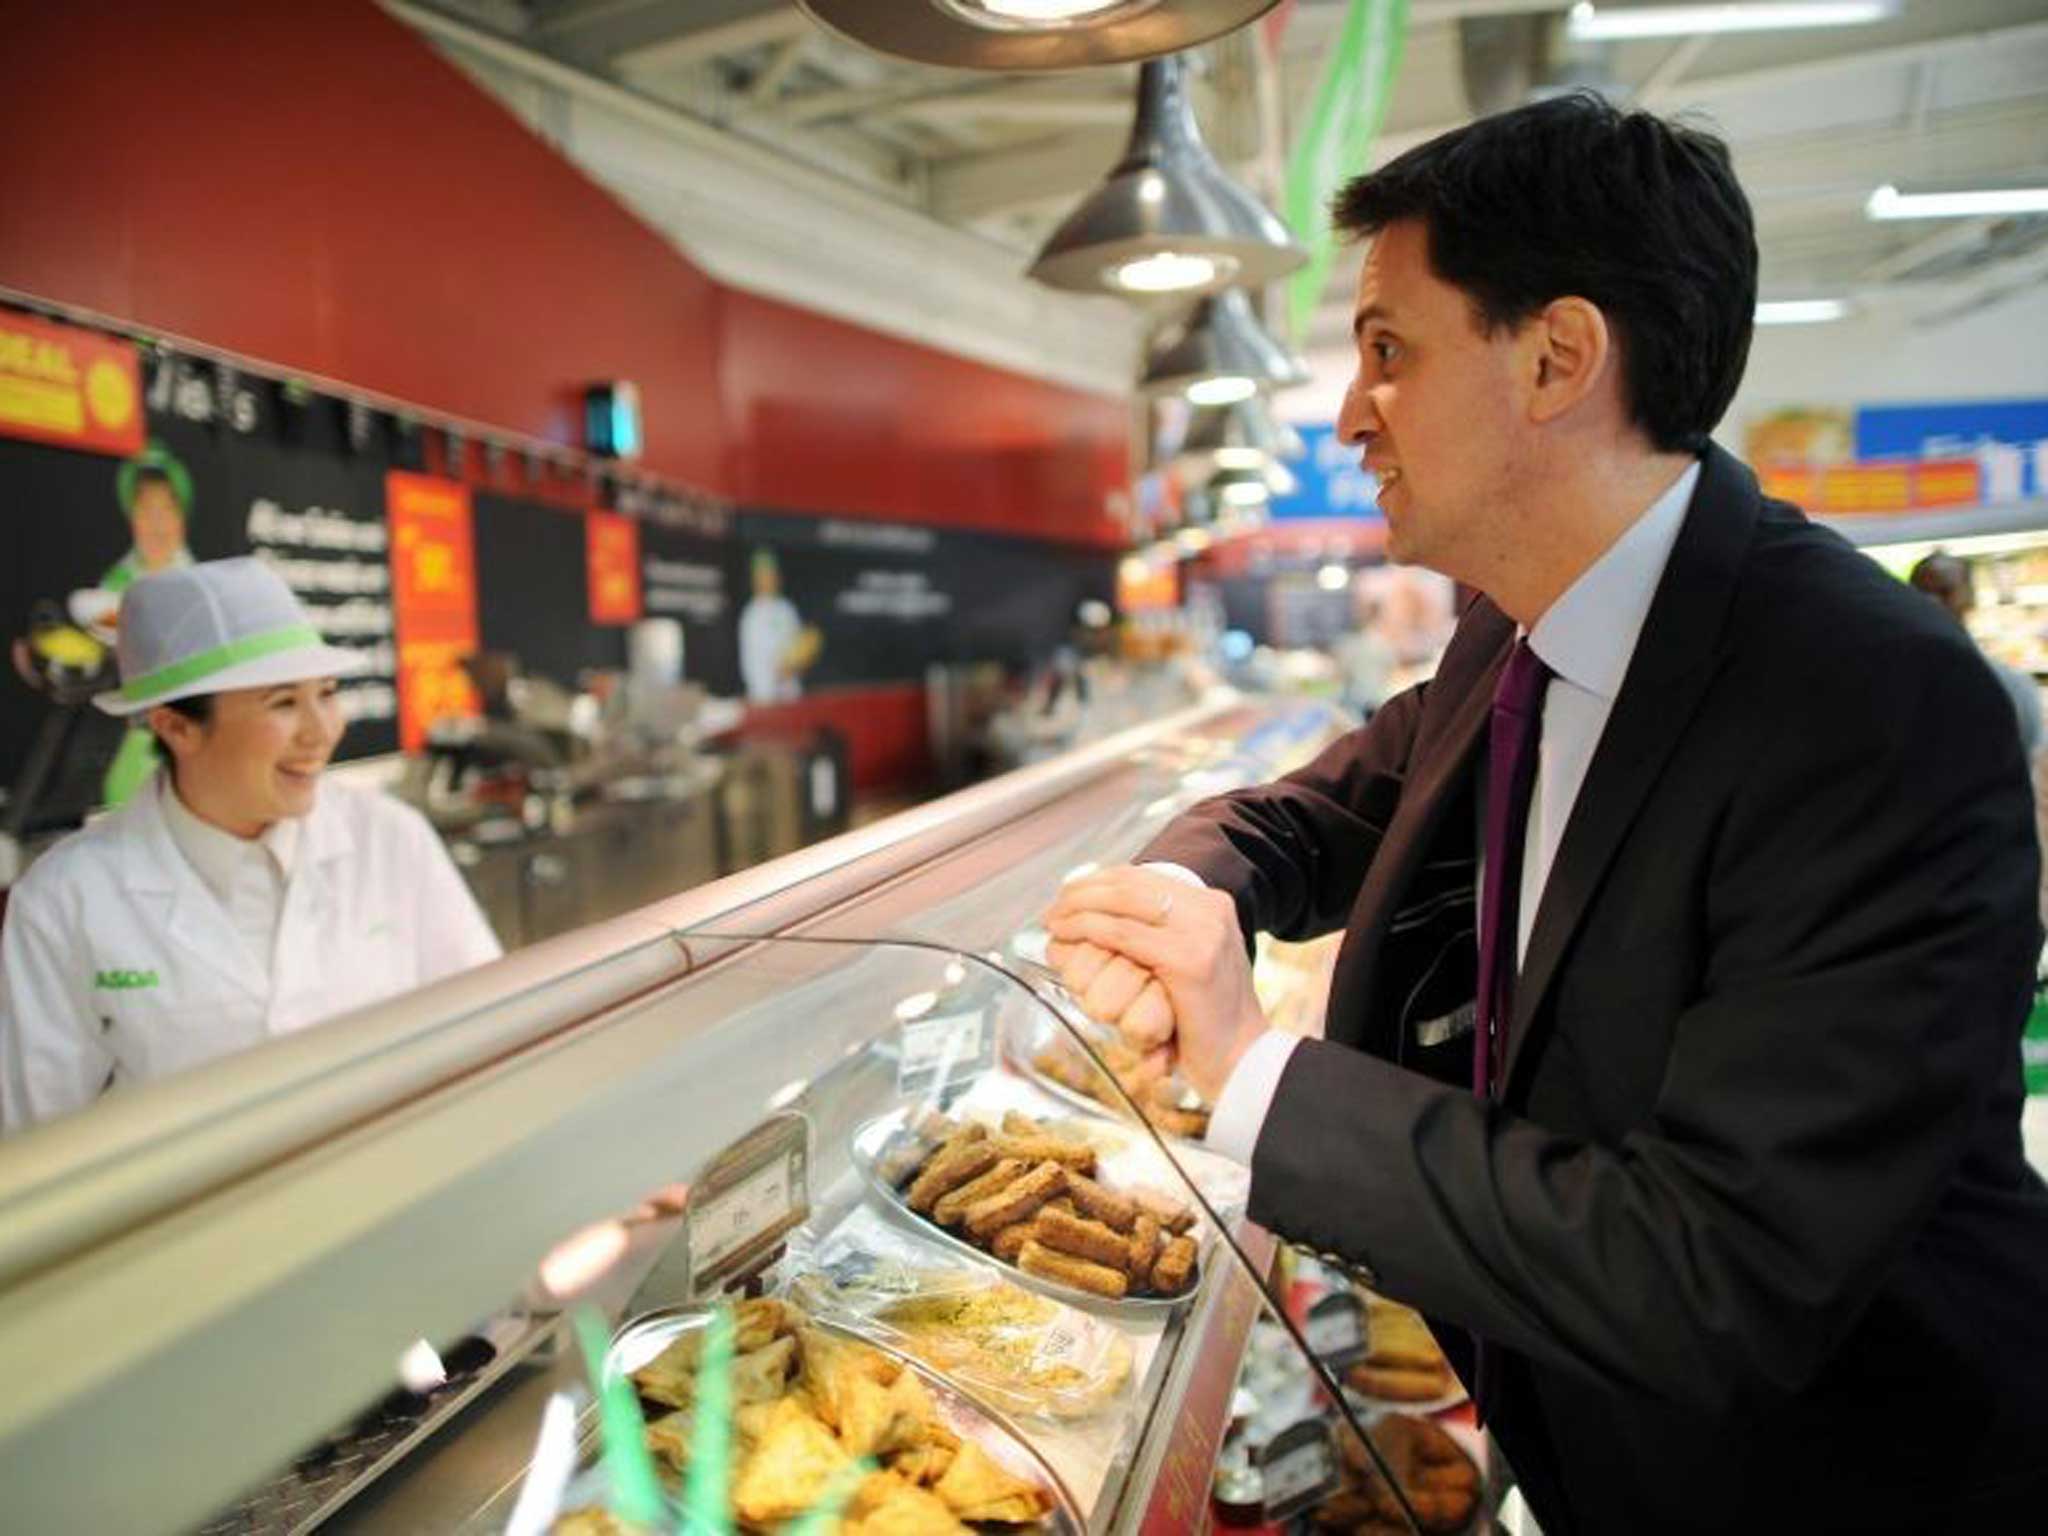 Miliband talks to a member of staff at an Asda supermarket in Harlow: the Labour leader recently admitted he didn't know the price of his own weekly shop